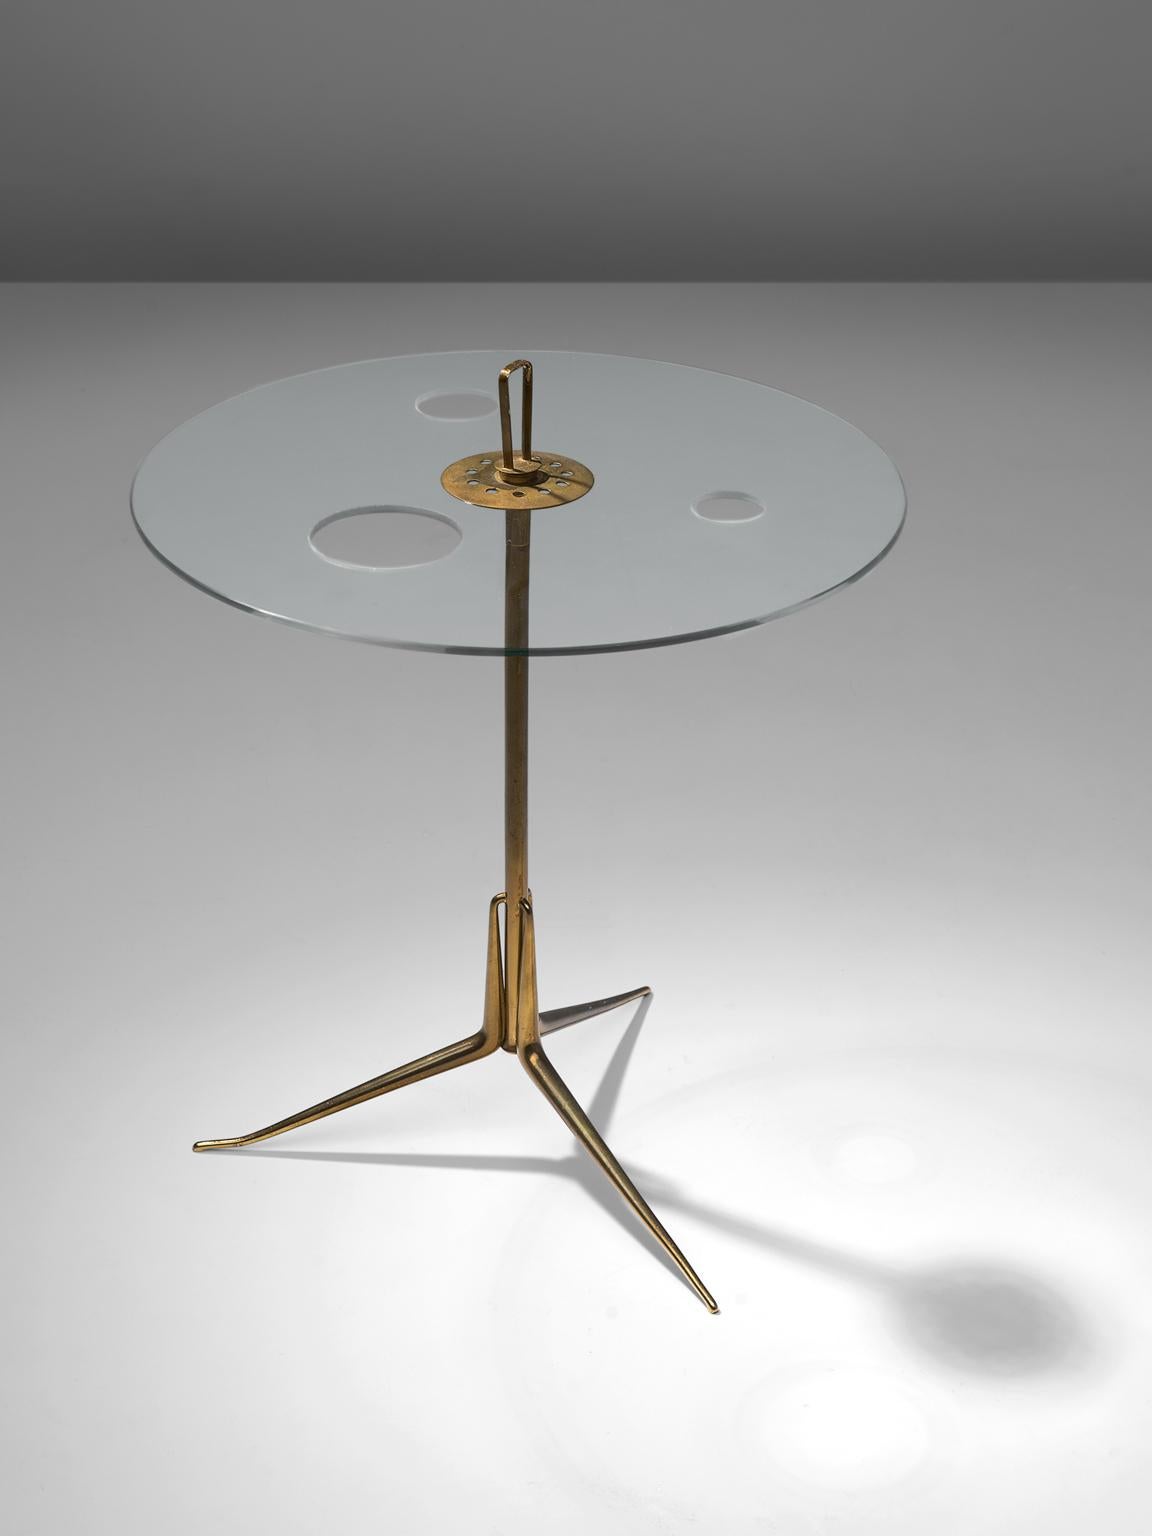 Arteluce, side table, glass and brass, Italy, 1950s

Arteluce brass and glass serving stand - An adjustable variation of this model Arteluce table was featured in the landmark exhibition 